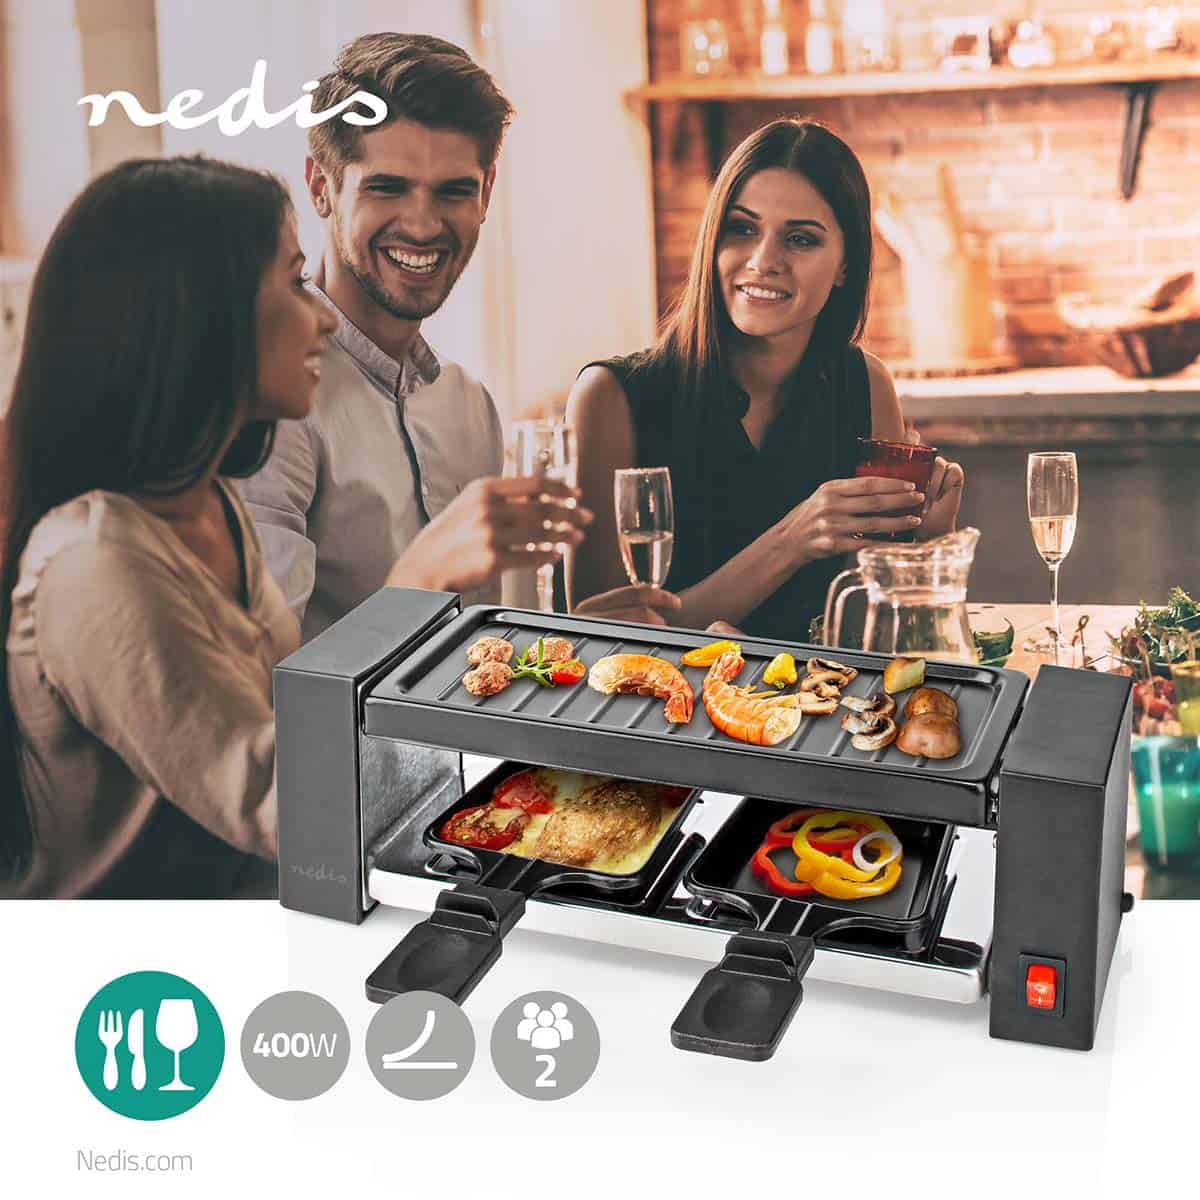 Nedis Gourmette Grill Raclette 2 osoby Prostokąt